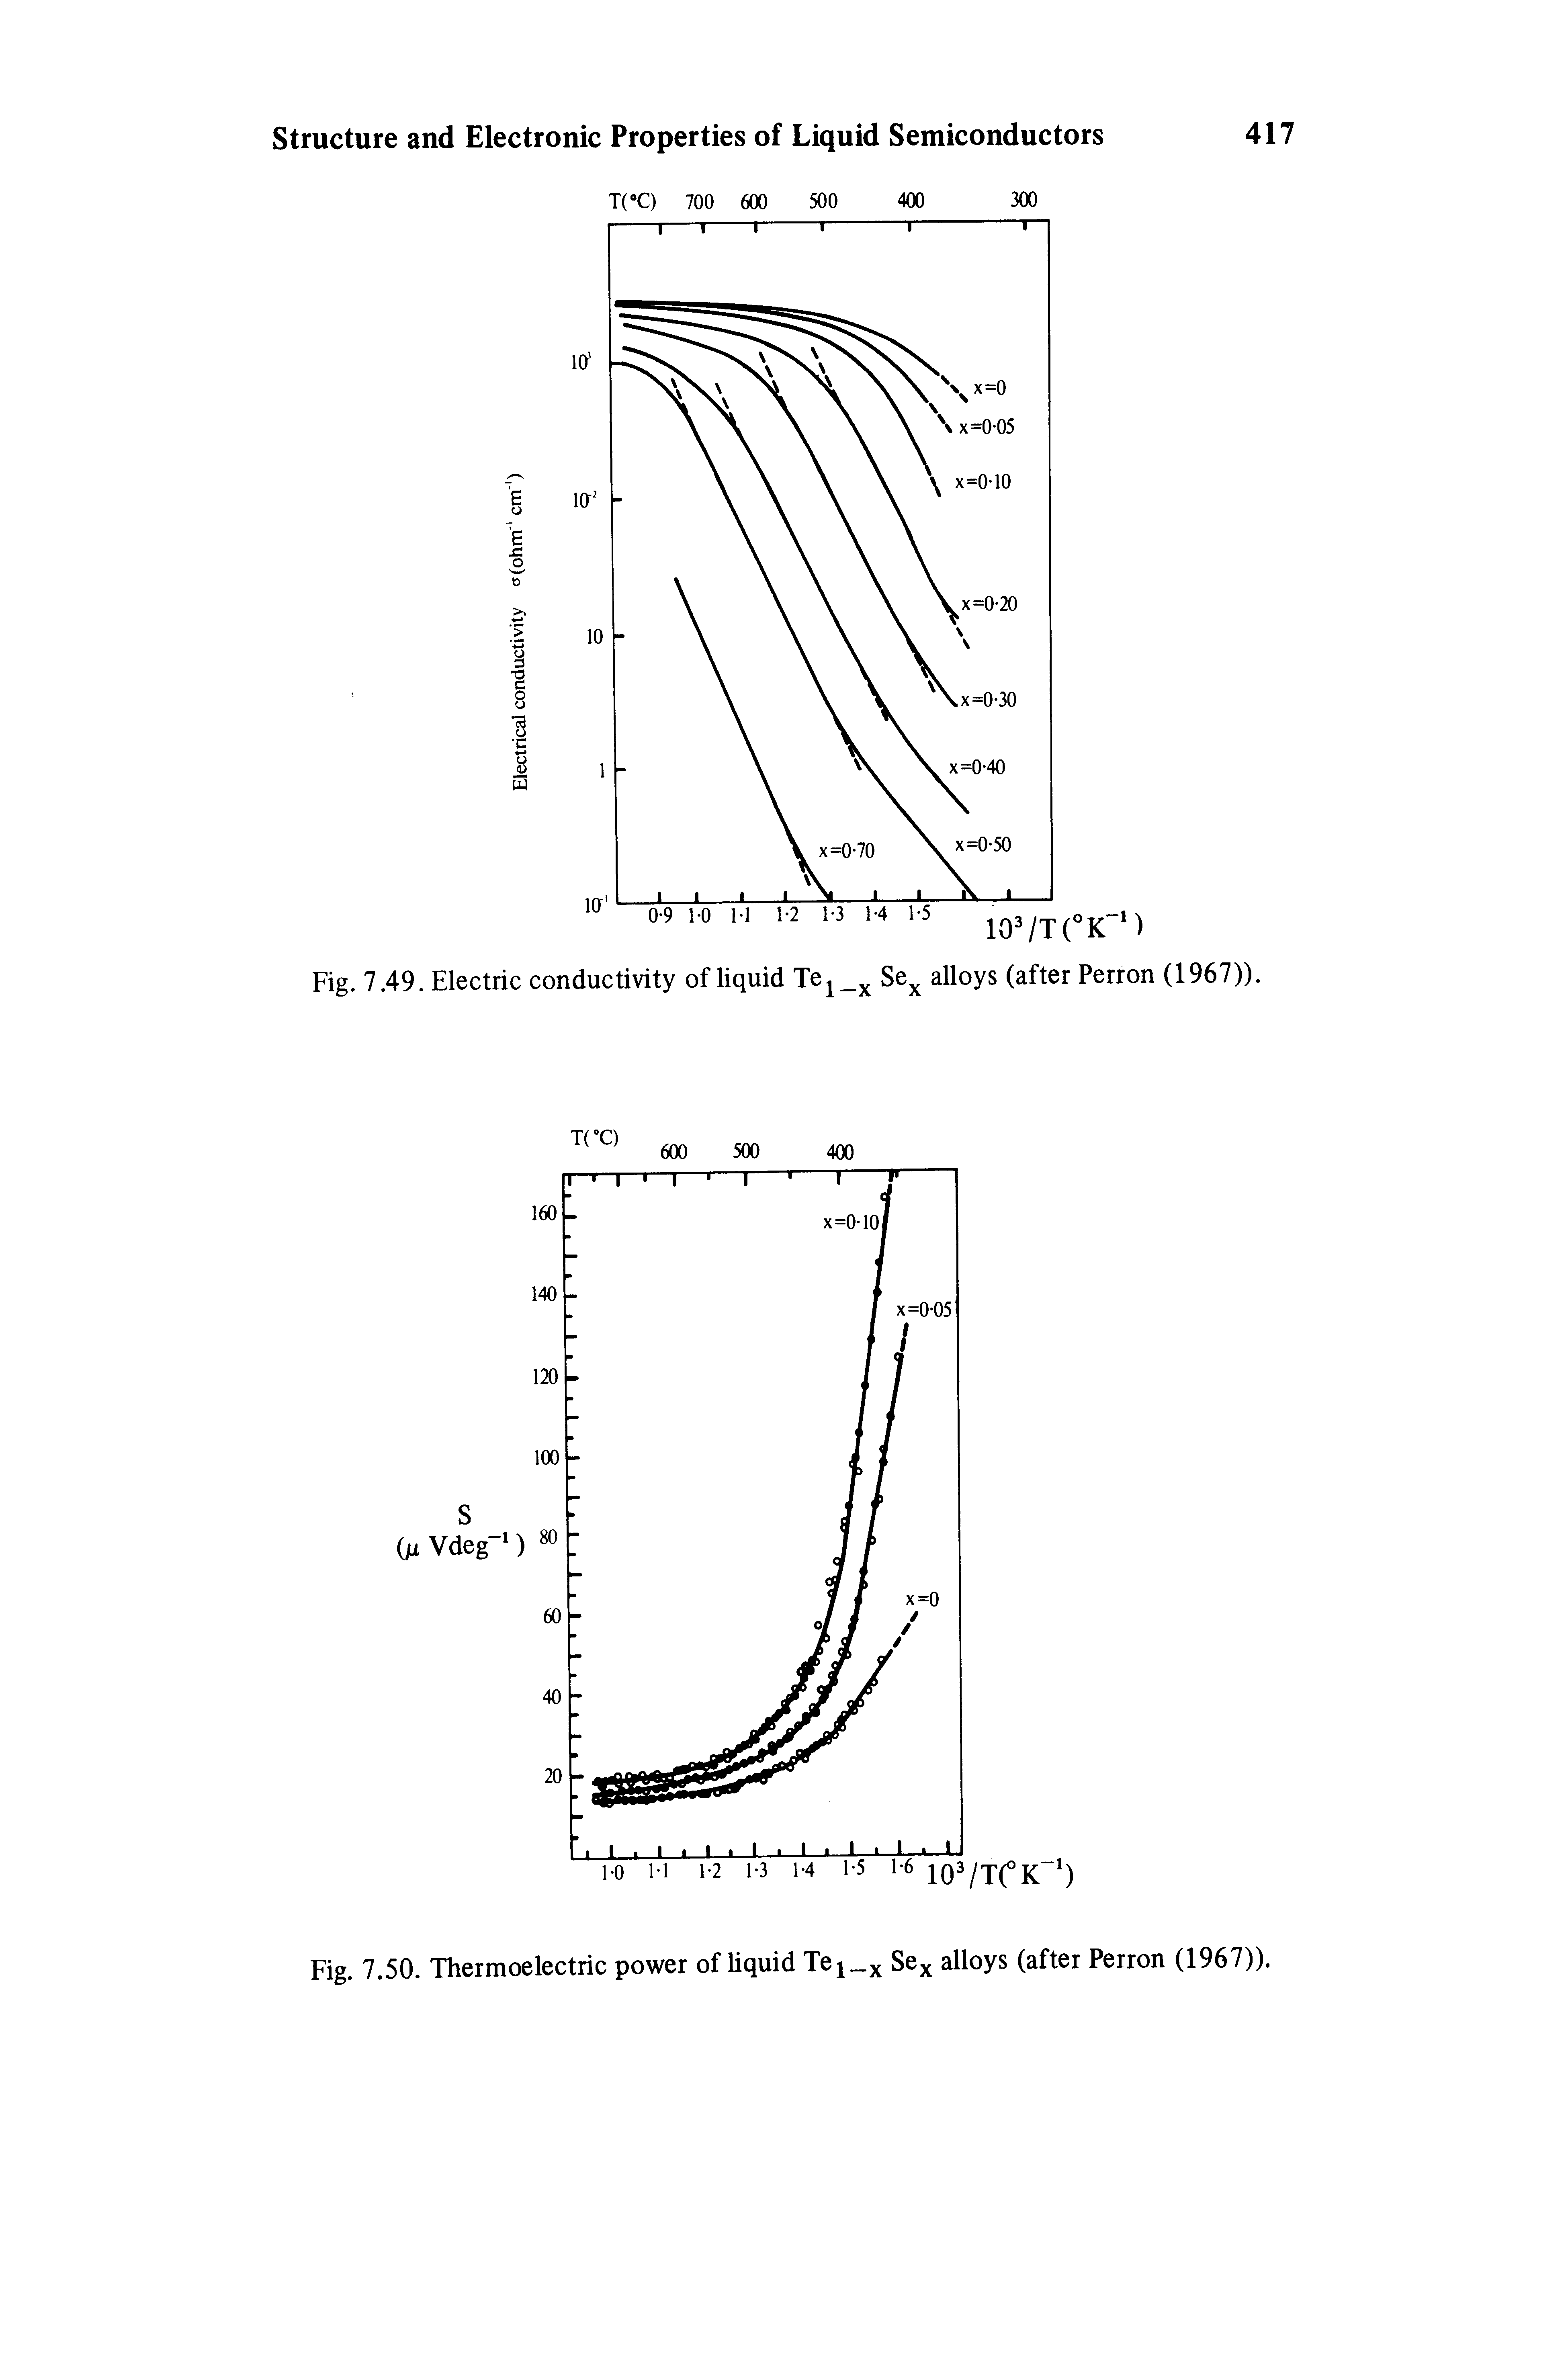 Fig. 7.50. Thermoelectric power of liquid Tei x Se alloys (after Perron (1967)).